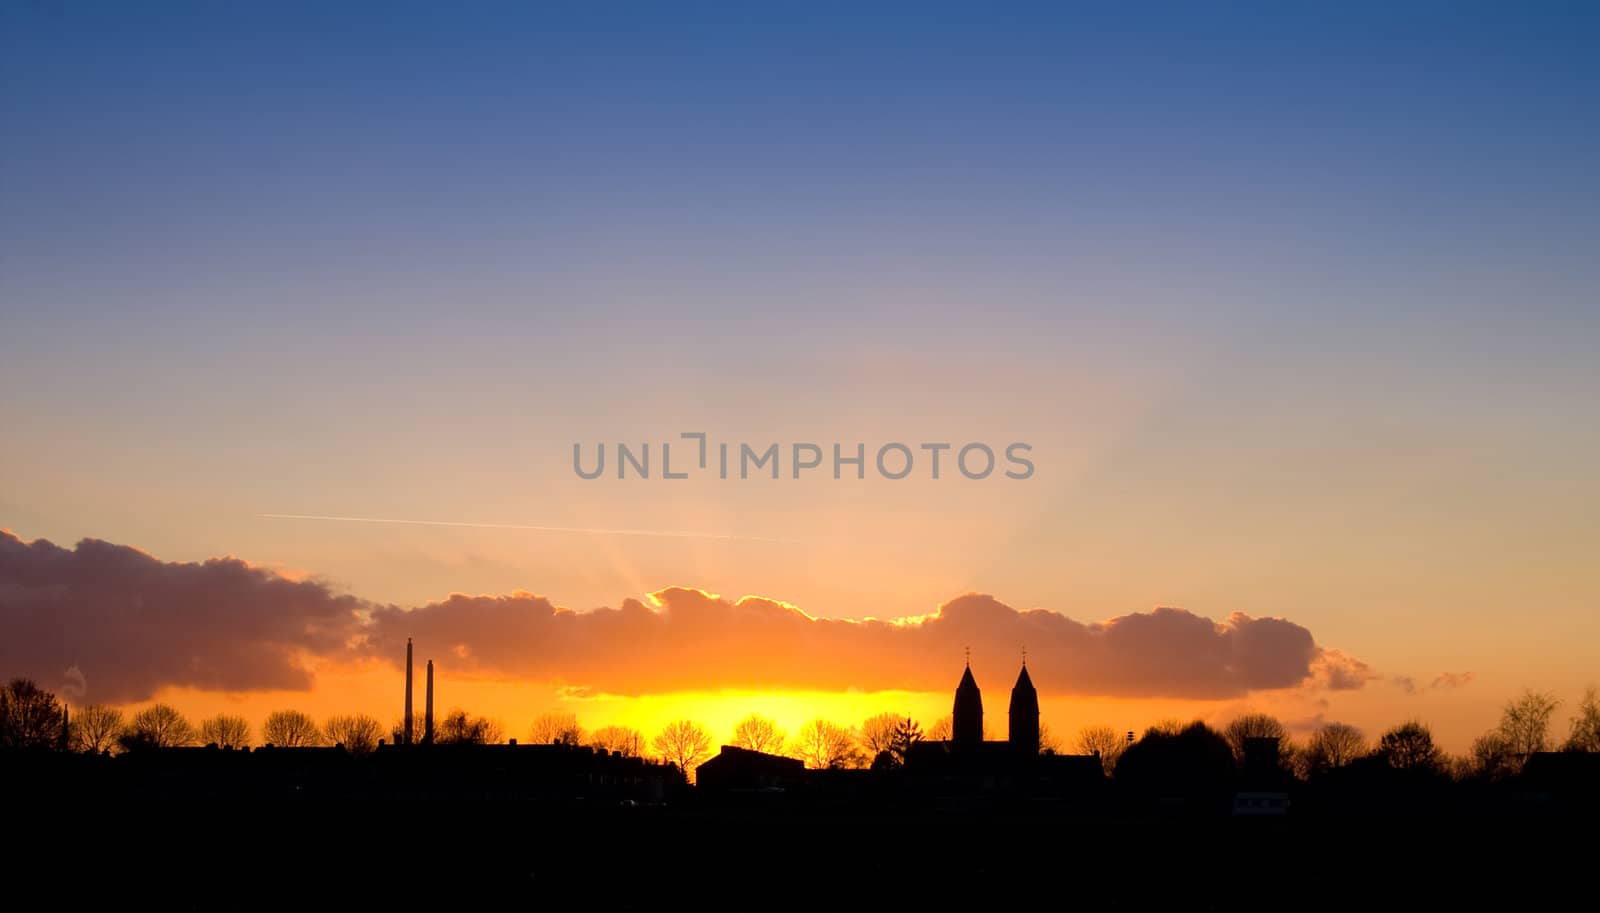 nice sunset with a silhouette of a village with church towers 
